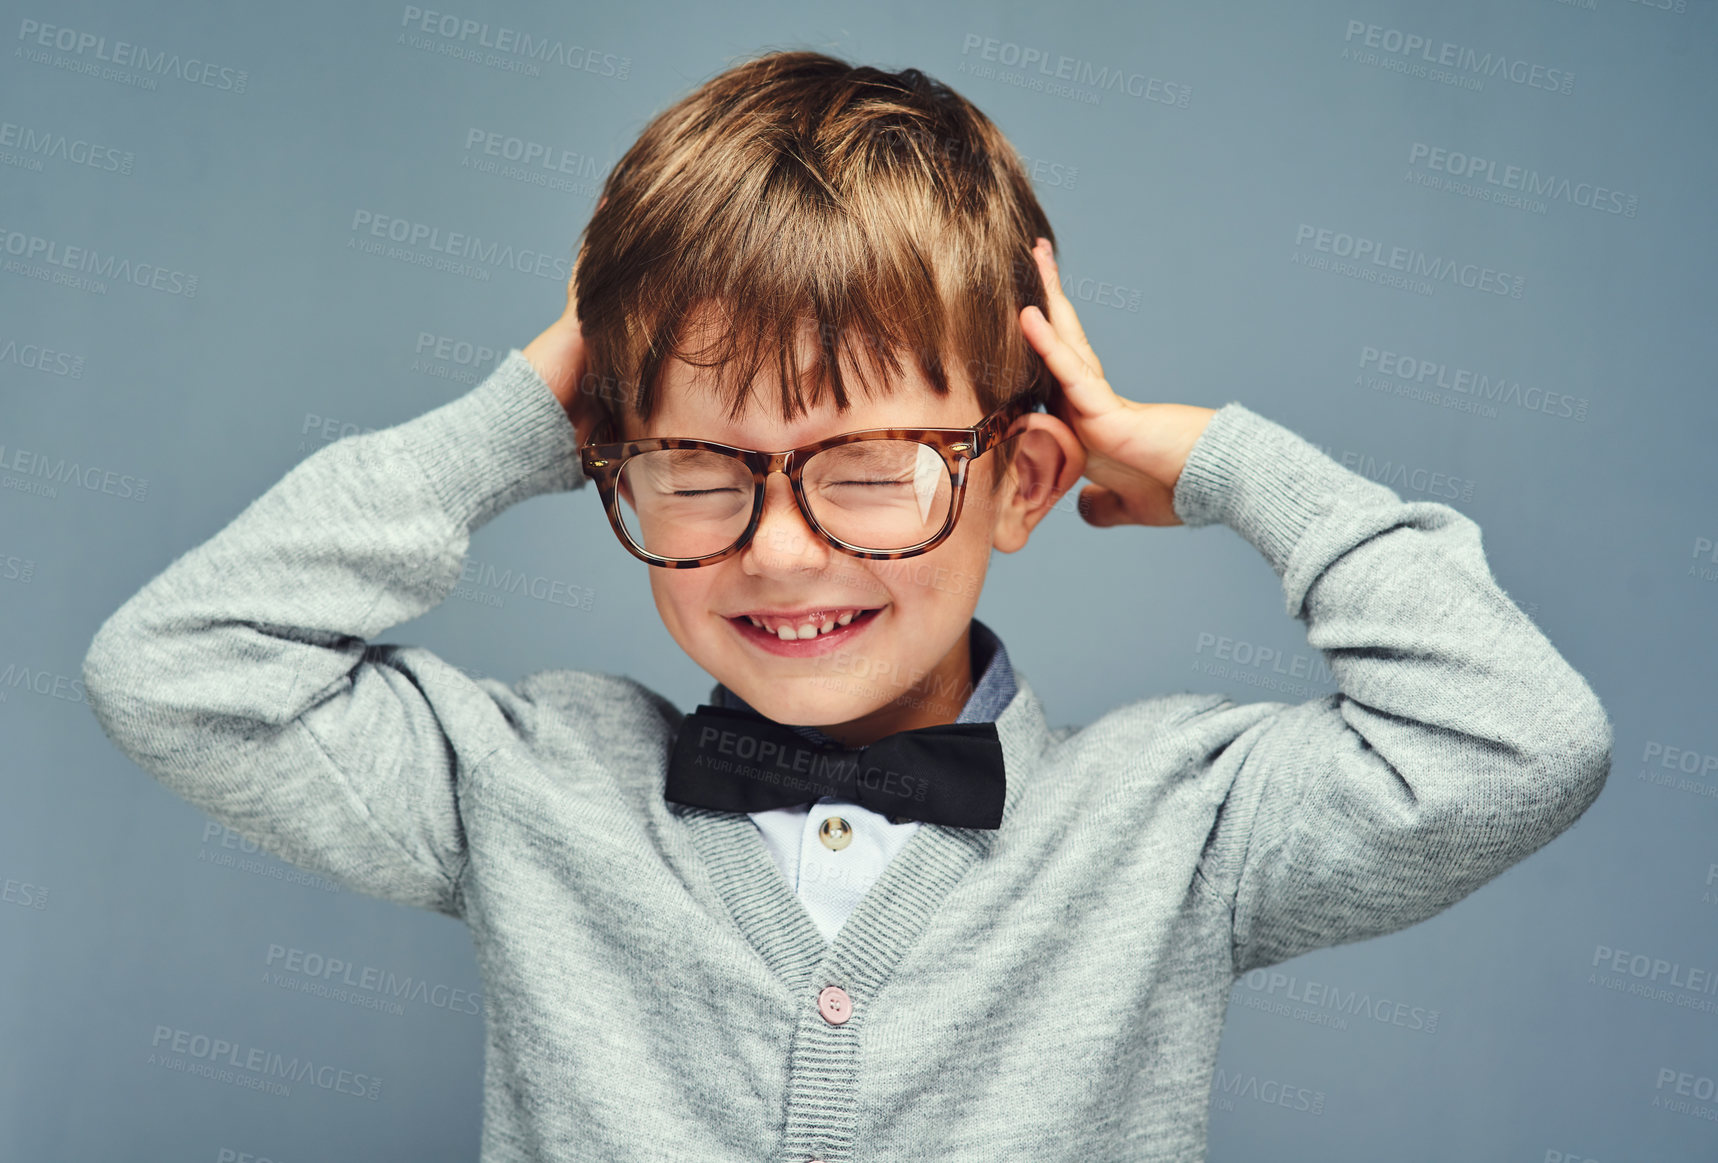 Buy stock photo Studio portrait of an adorable little boy dressed smartly against a gray background